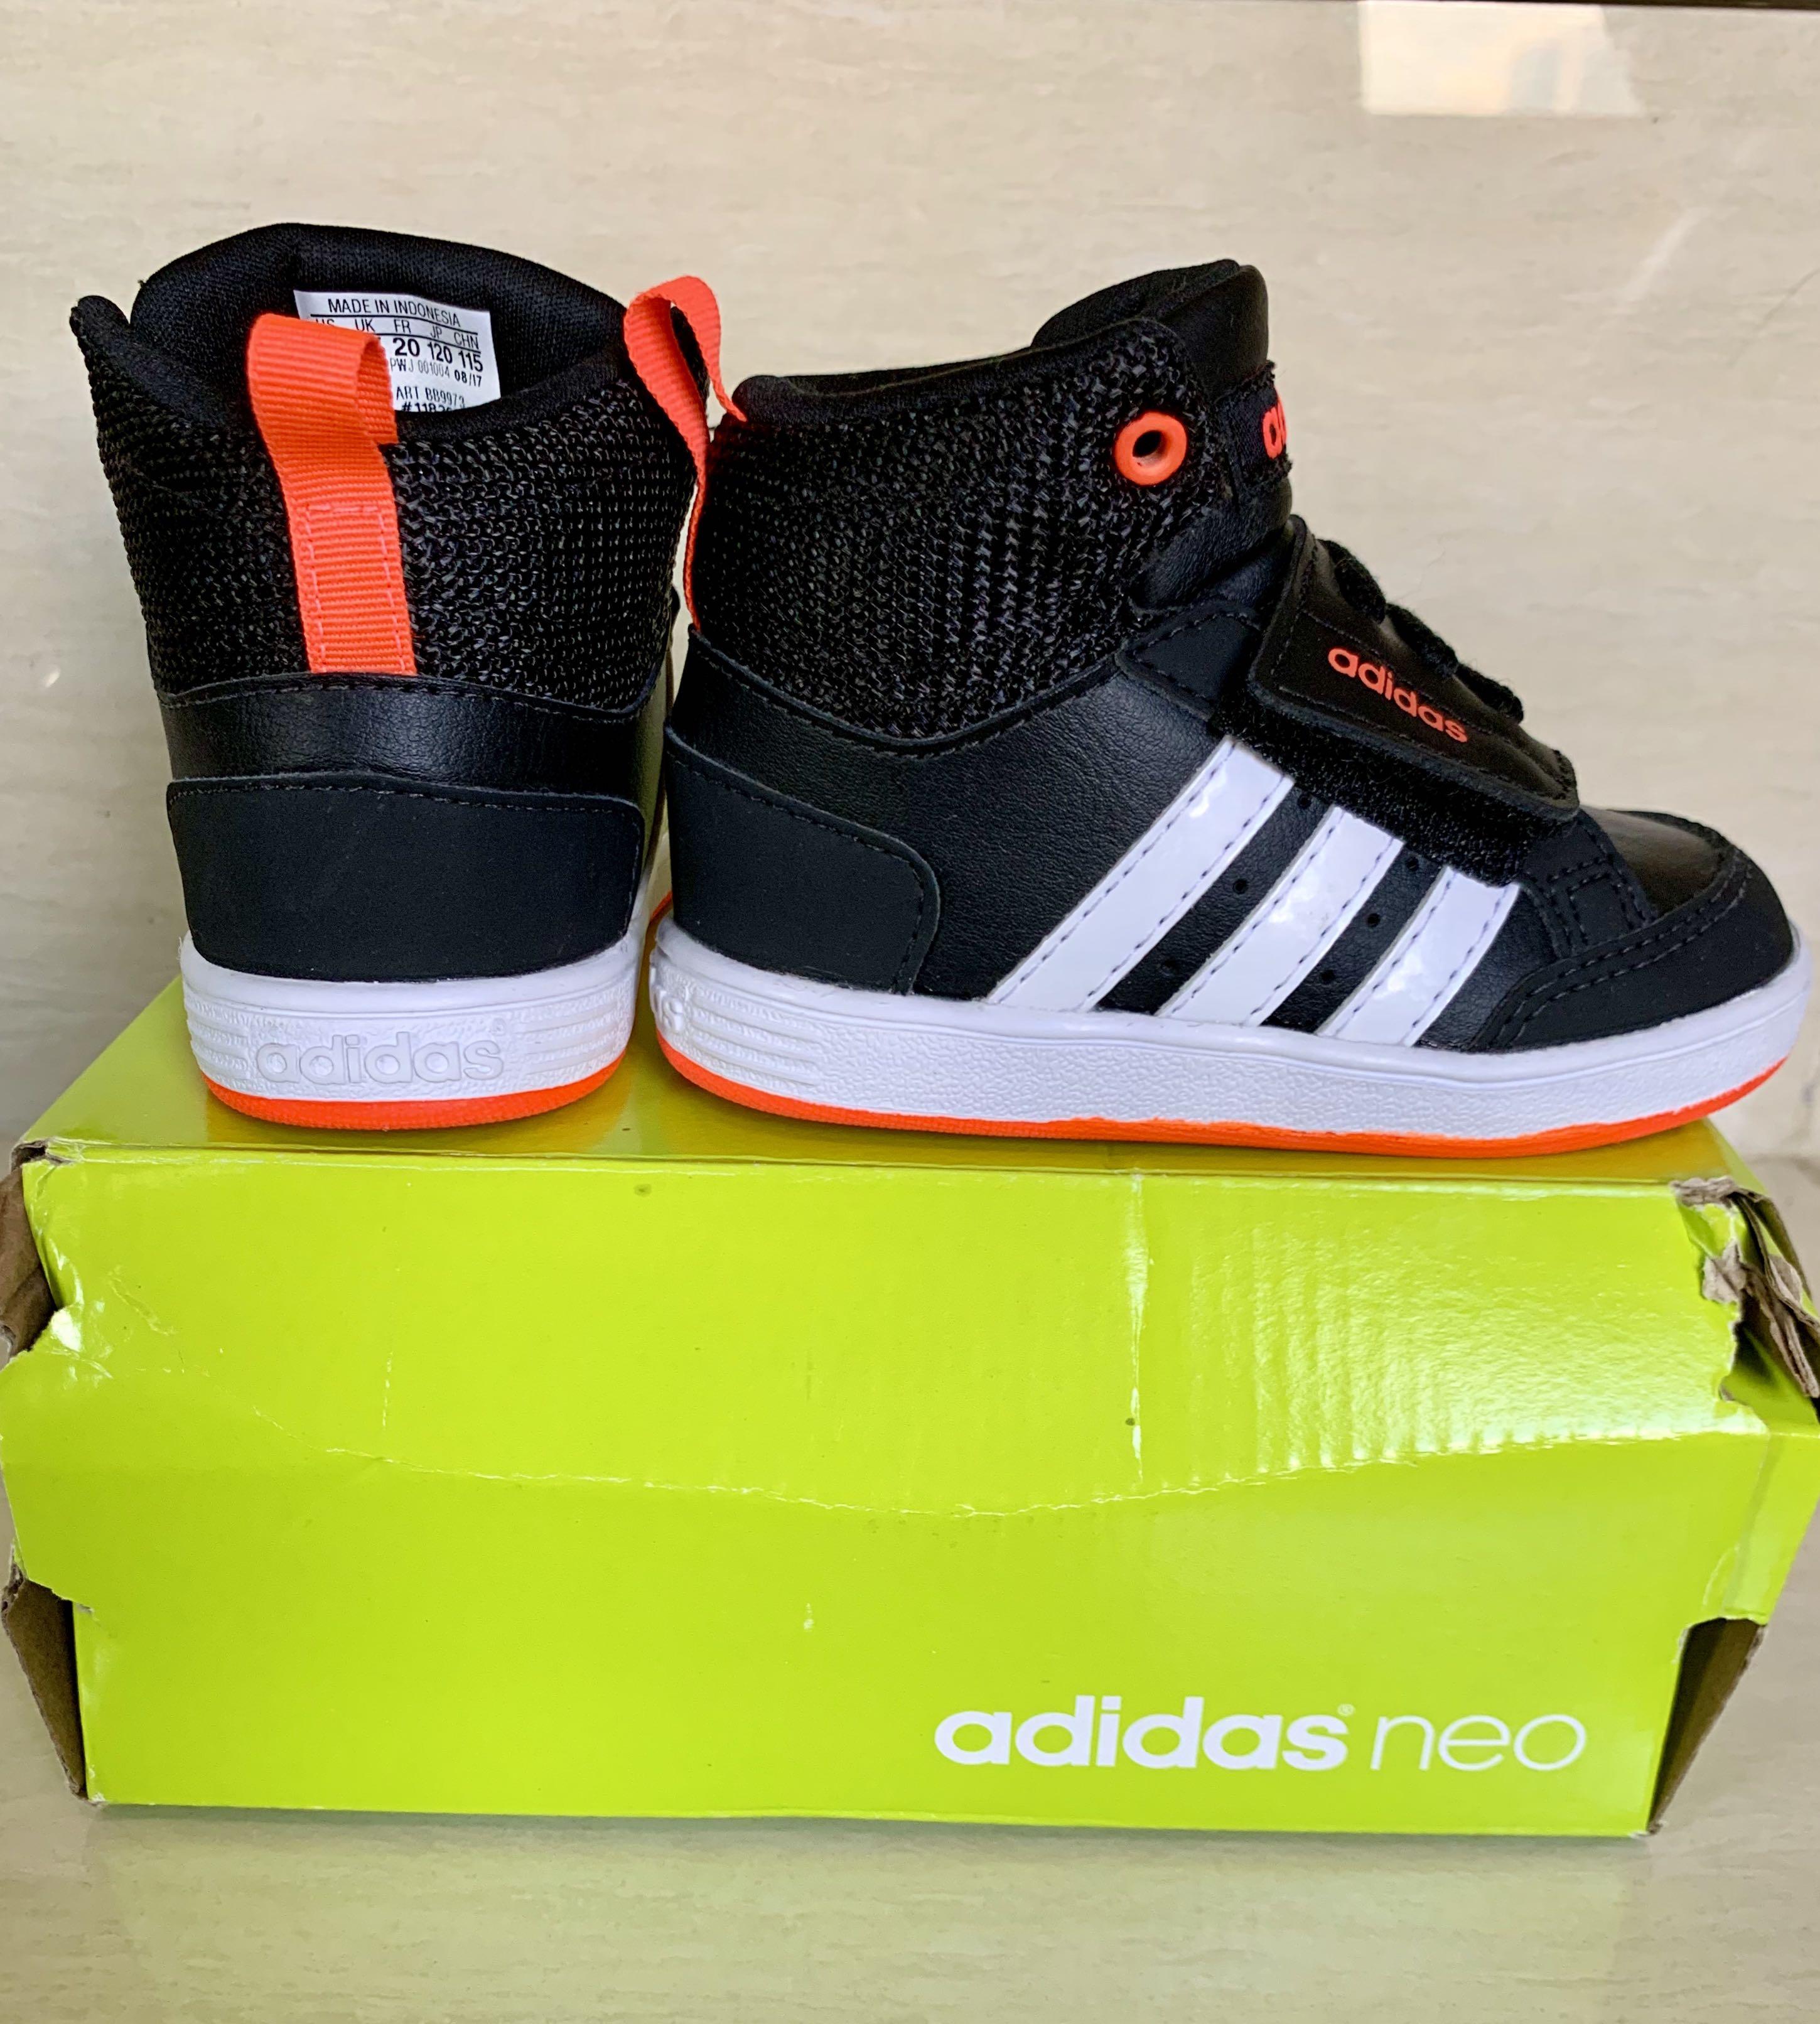 adidas neo baby shoes